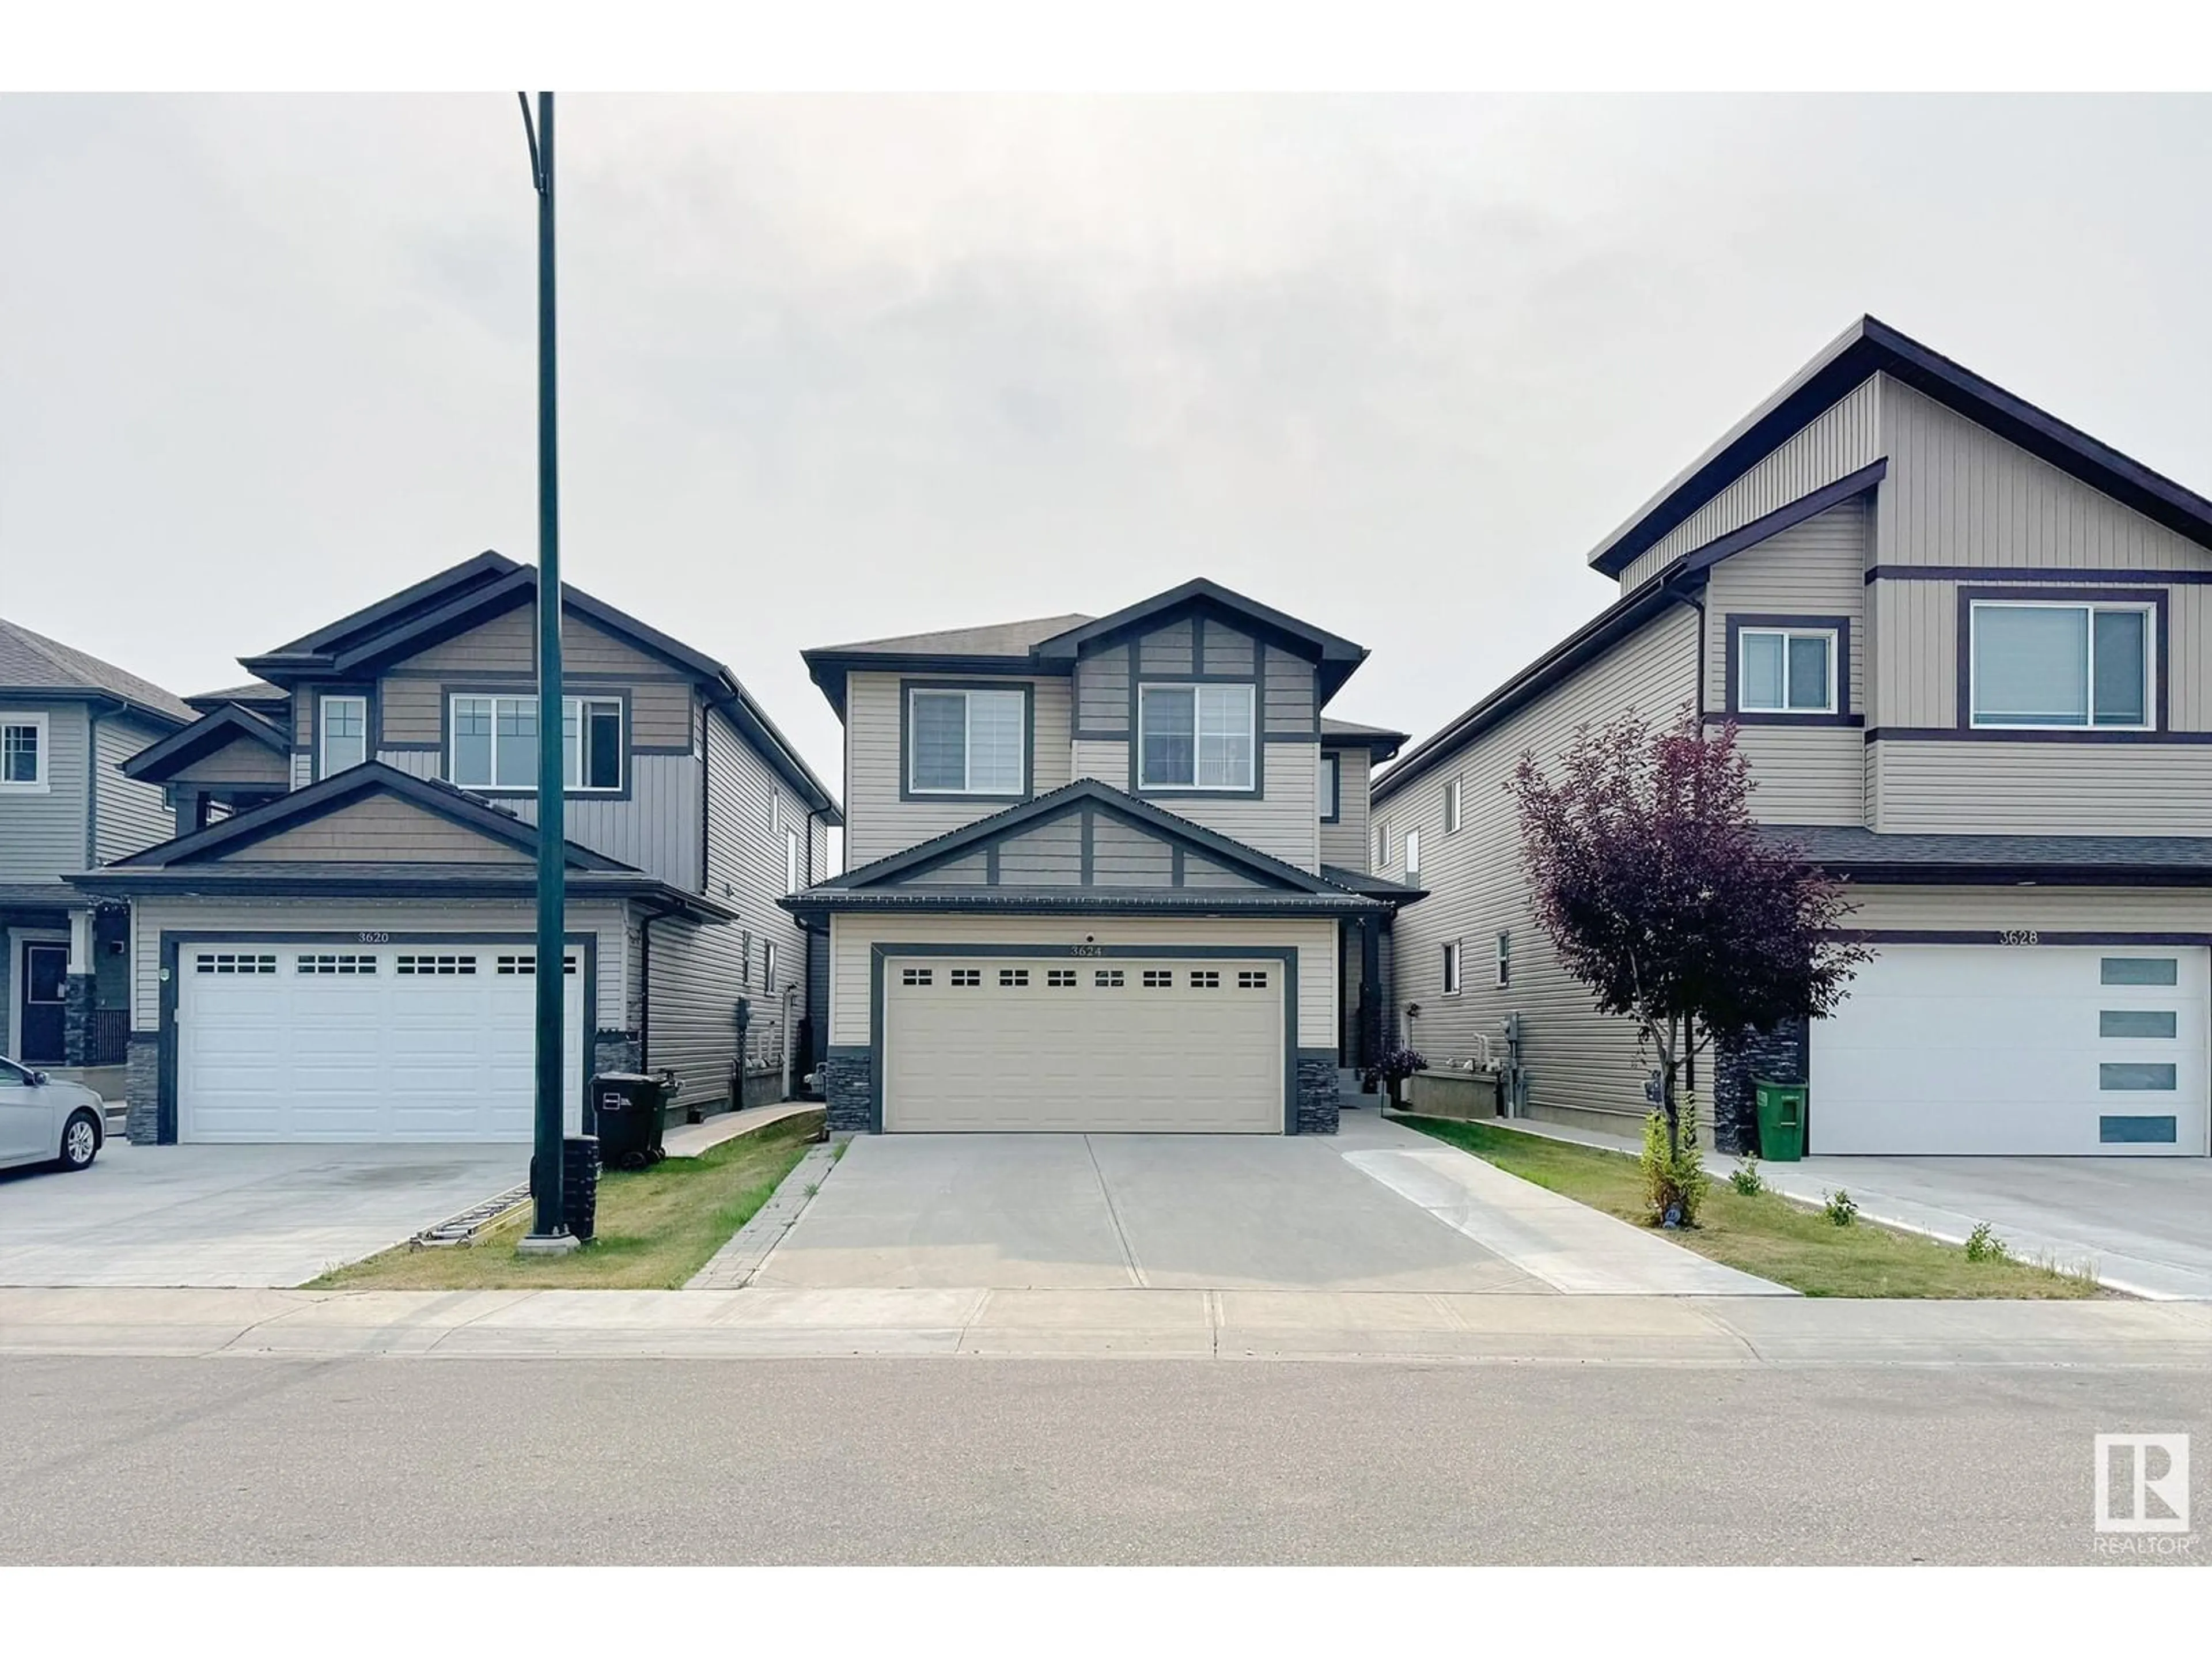 Frontside or backside of a home for 3624 8 street NW, Edmonton Alberta T6T1A1